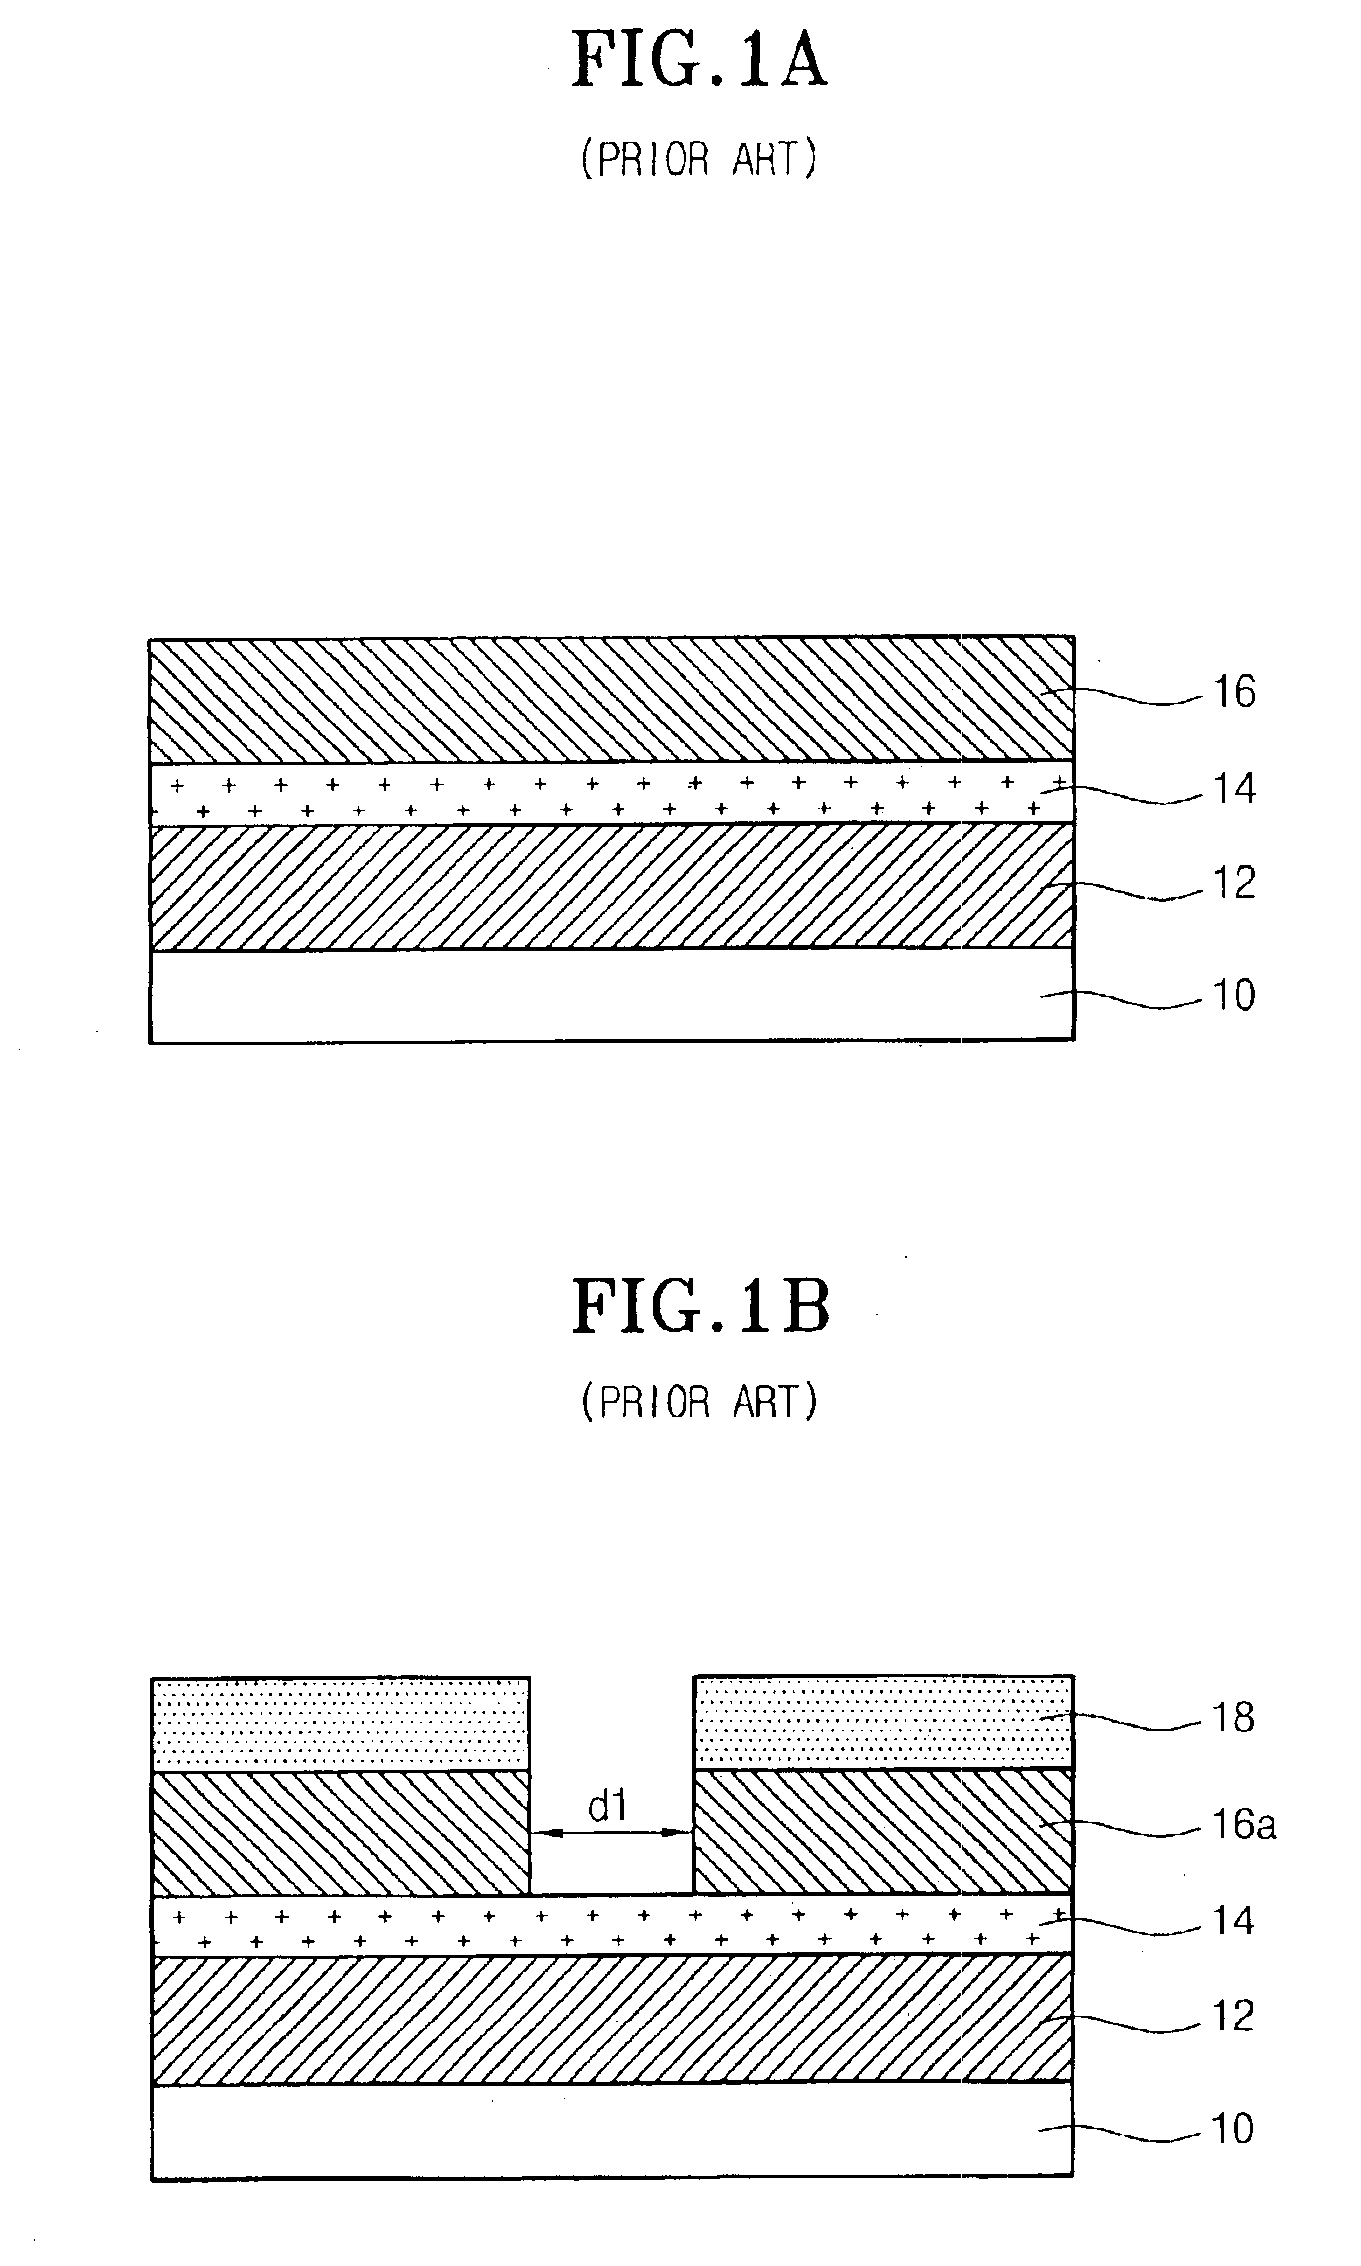 Method of forming copper wire on semiconductor device